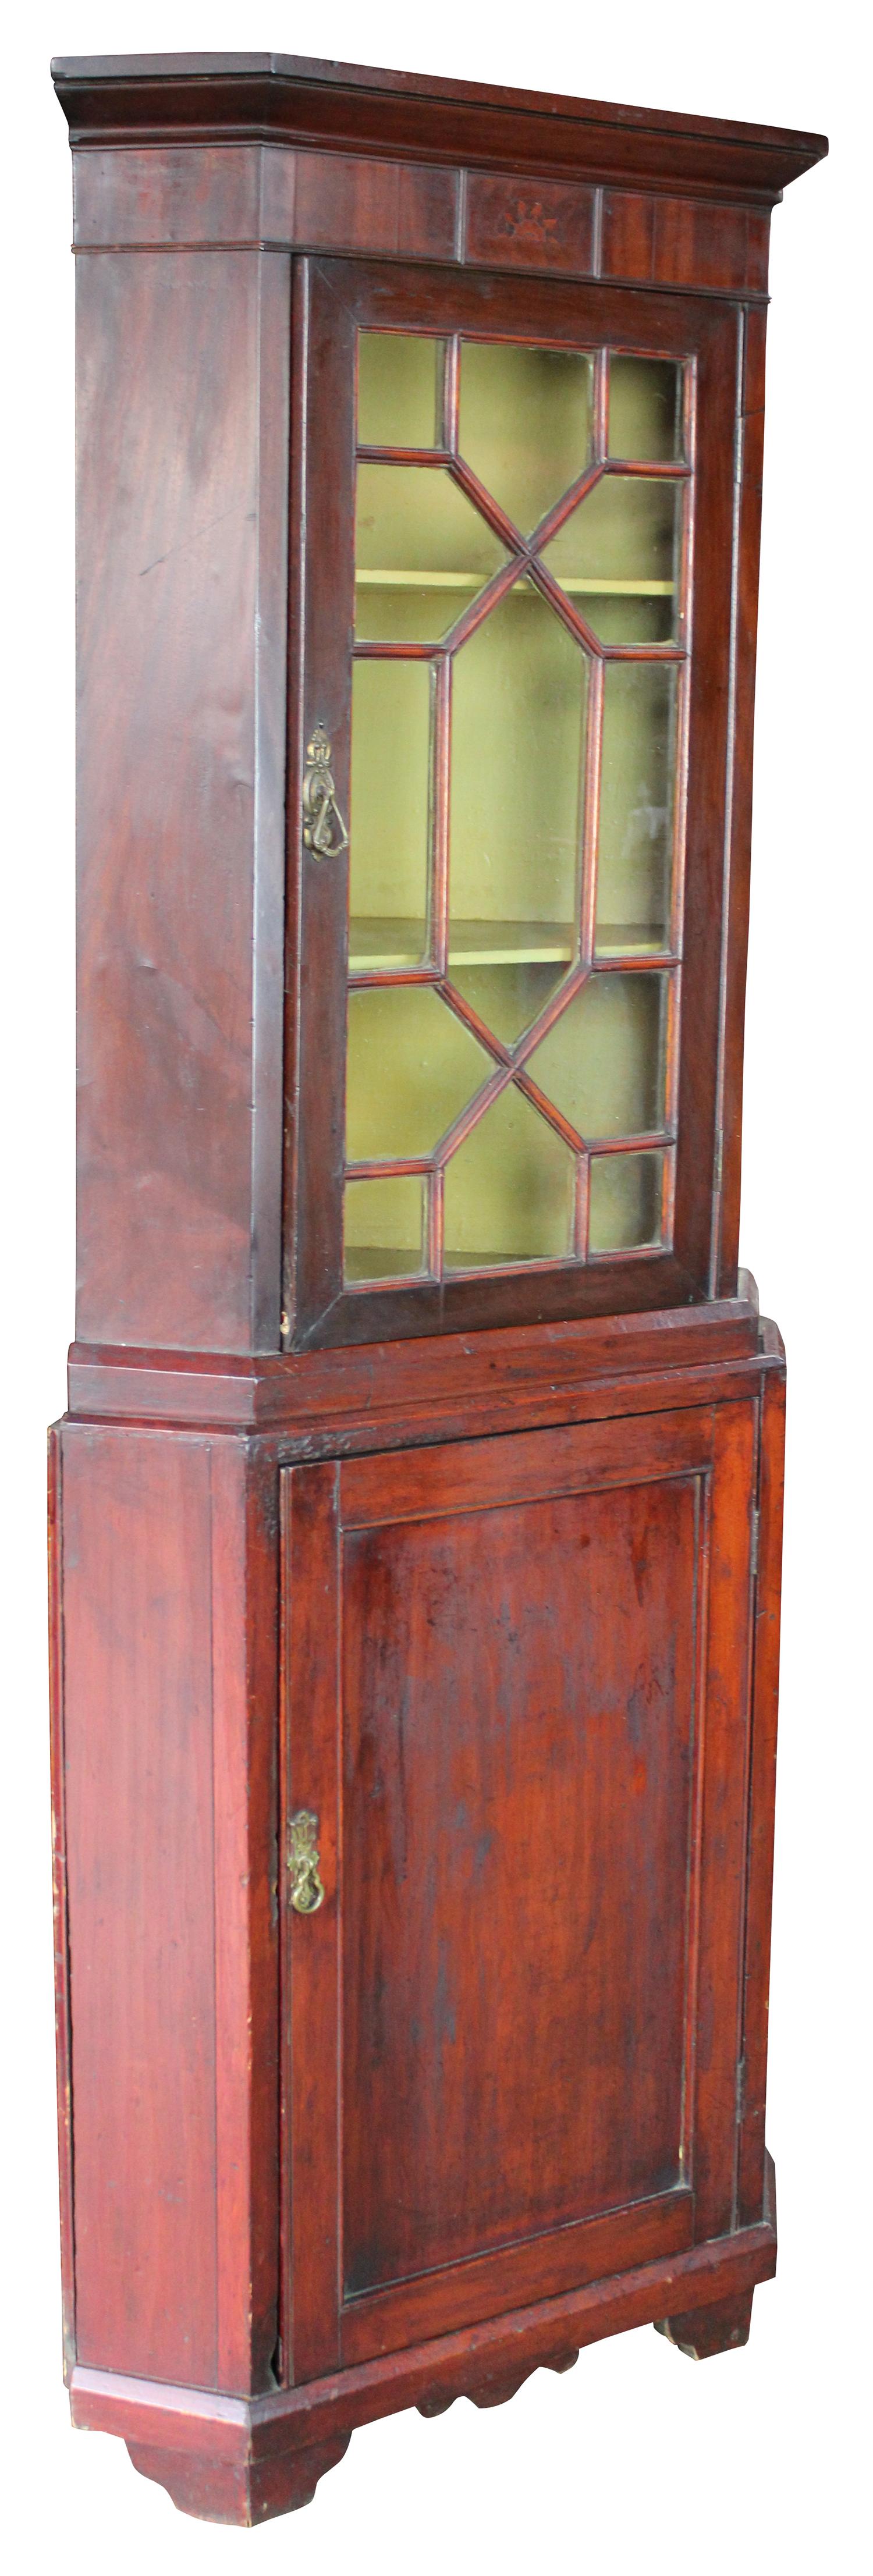 Antique petite Georgian style corner cupboard. Made from mahogany with a yellow painted interior and brass handles. Display door is lined in elegant fretwork to neatly display curiosities. Measure: 72”.
   